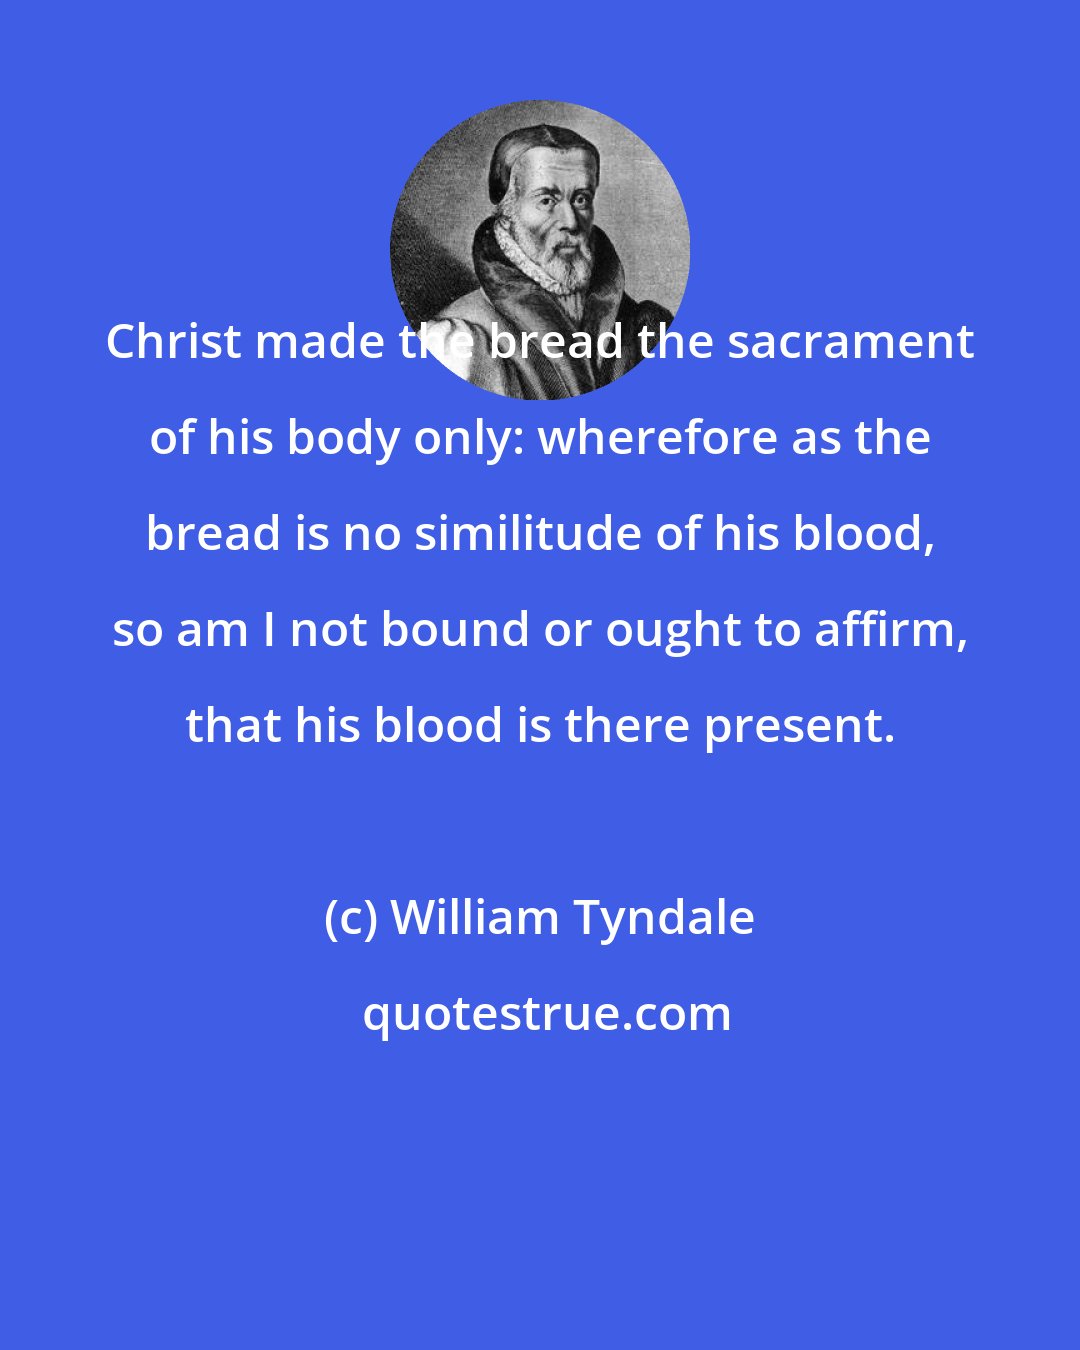 William Tyndale: Christ made the bread the sacrament of his body only: wherefore as the bread is no similitude of his blood, so am I not bound or ought to affirm, that his blood is there present.